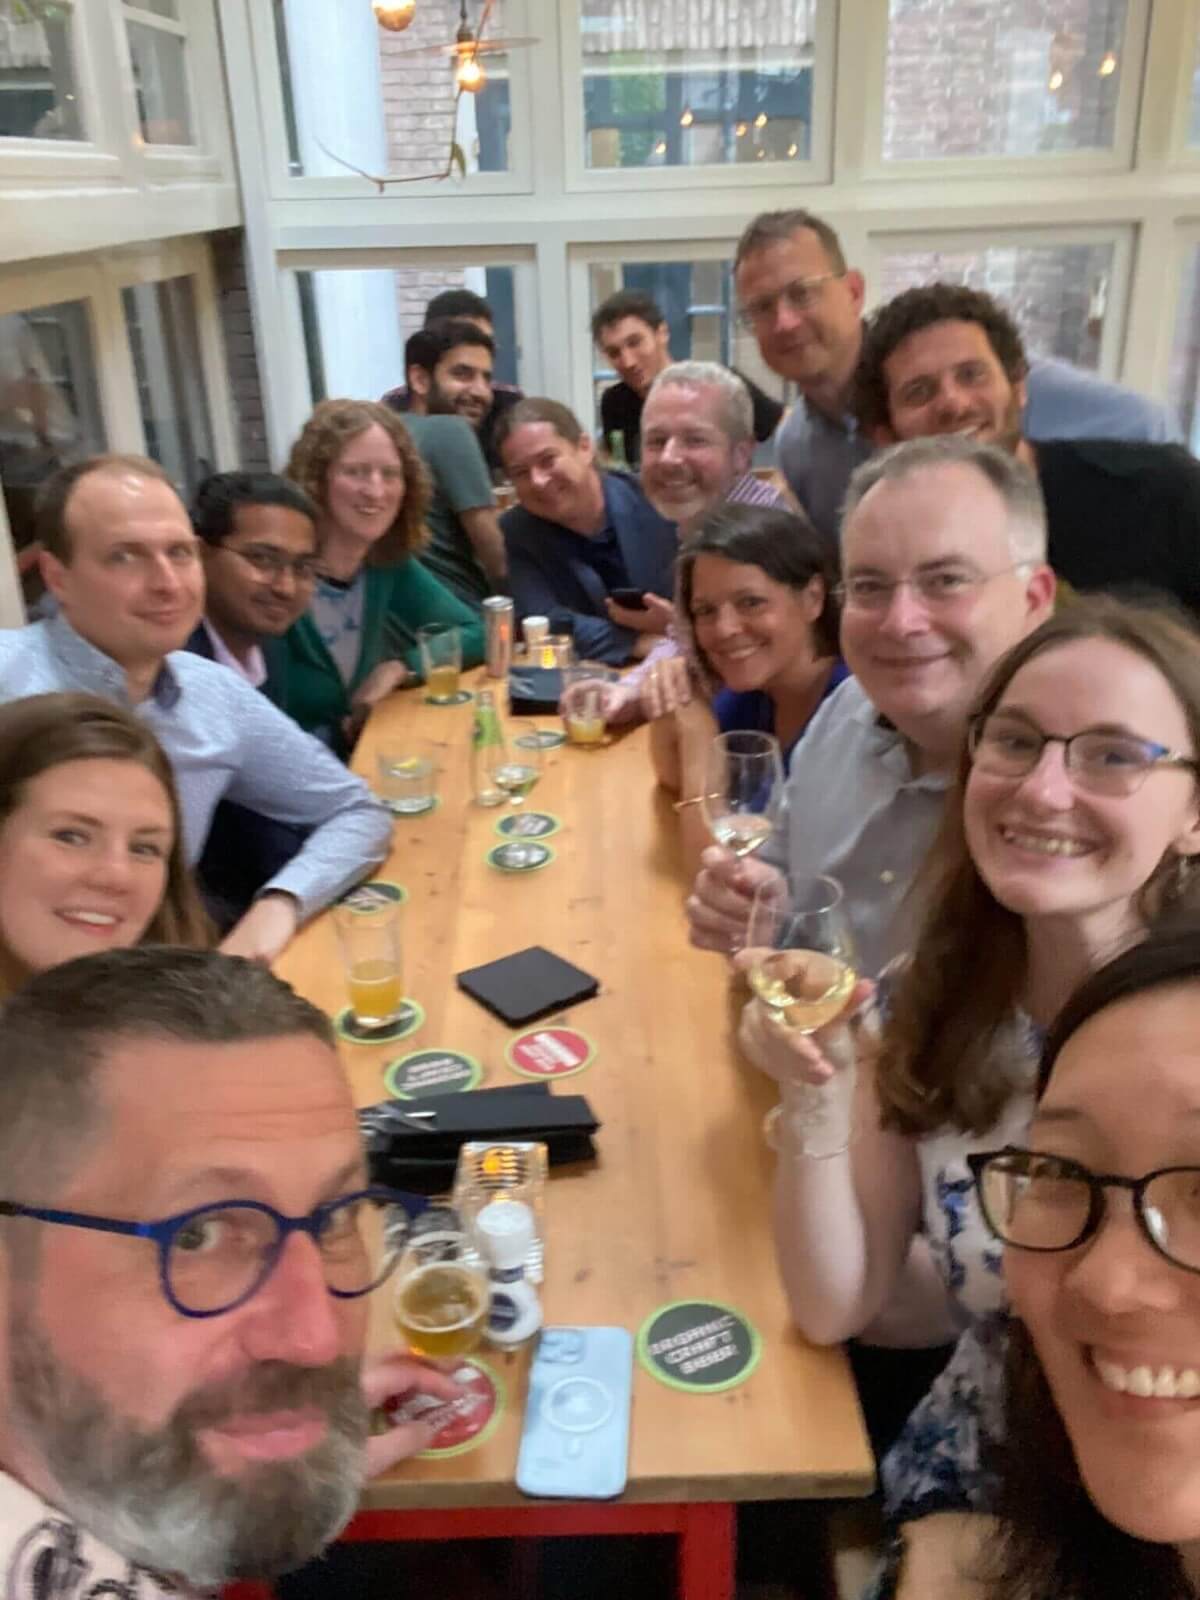 A group of phage enthusiasts meets for much-deserved beers and food after the event!